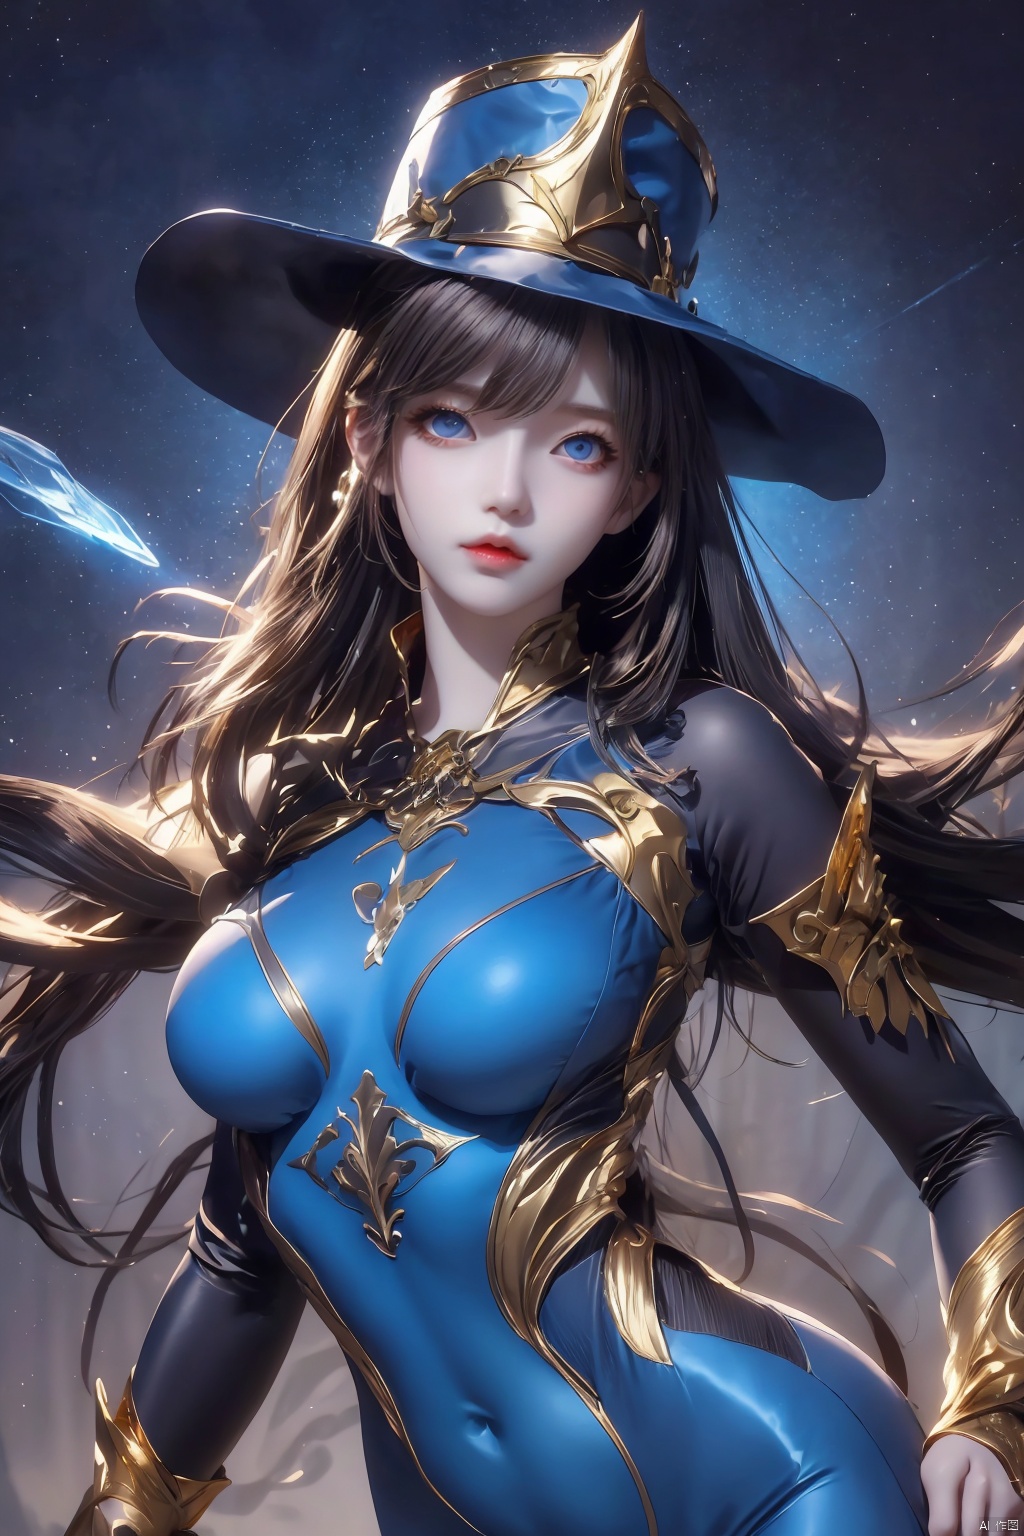  The image showcases female,blue eyes,fantasy outfit,magician,long dark hair,action pose,gold trim,oversized hat,dynamic composition,gemstones,bodysuit,epaulets,high-quality illustration,portrait orientation,mysterious,youthful appearance,star patterns,rich colors,detailed costume design,magic-themed accessories,celestial motifs.,